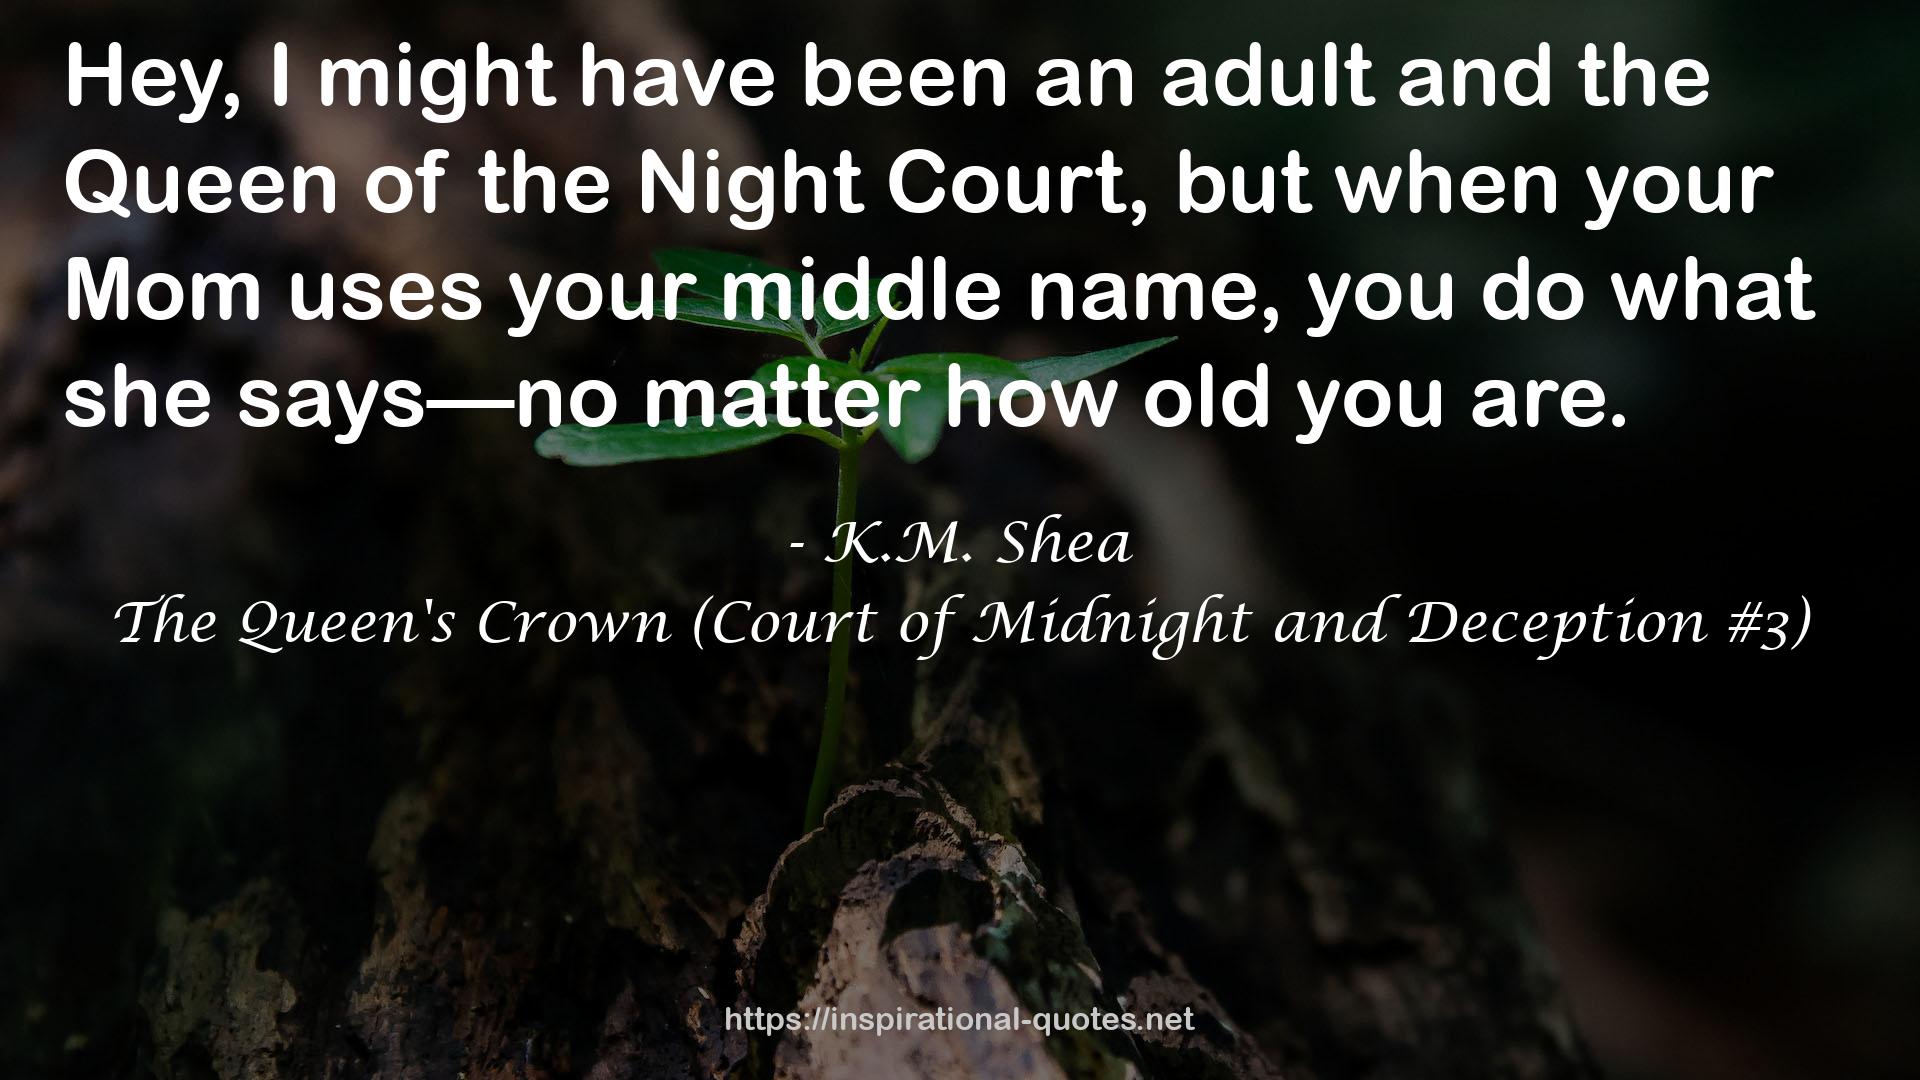 The Queen's Crown (Court of Midnight and Deception #3) QUOTES